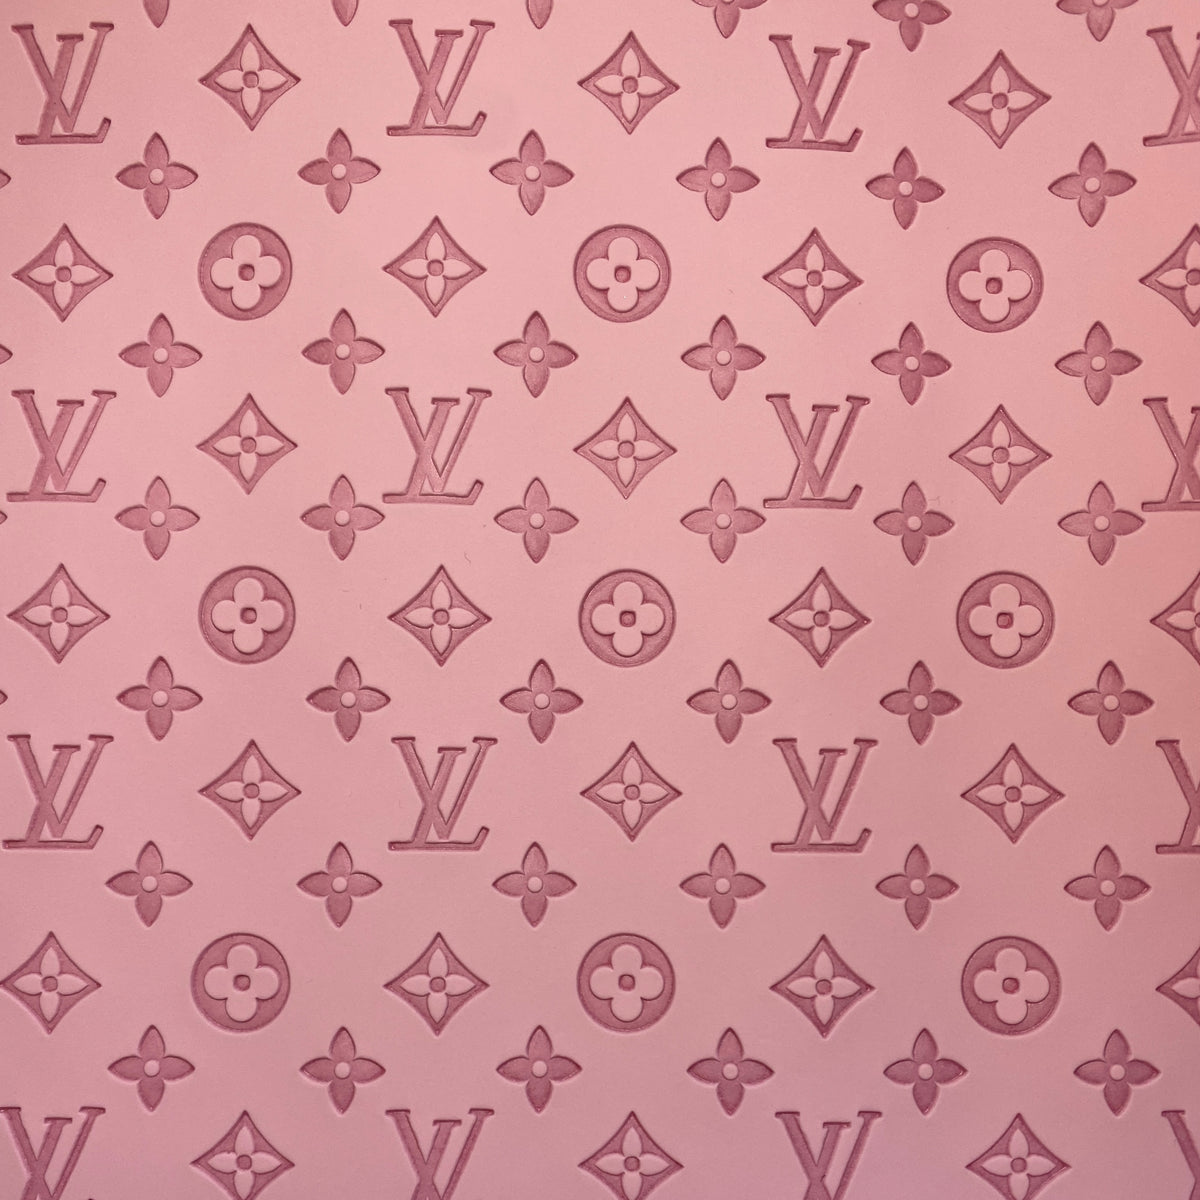 Patterned Vinyl and HTV Sheets - Pink on Pink Louis Vuitton Logo (LV1)